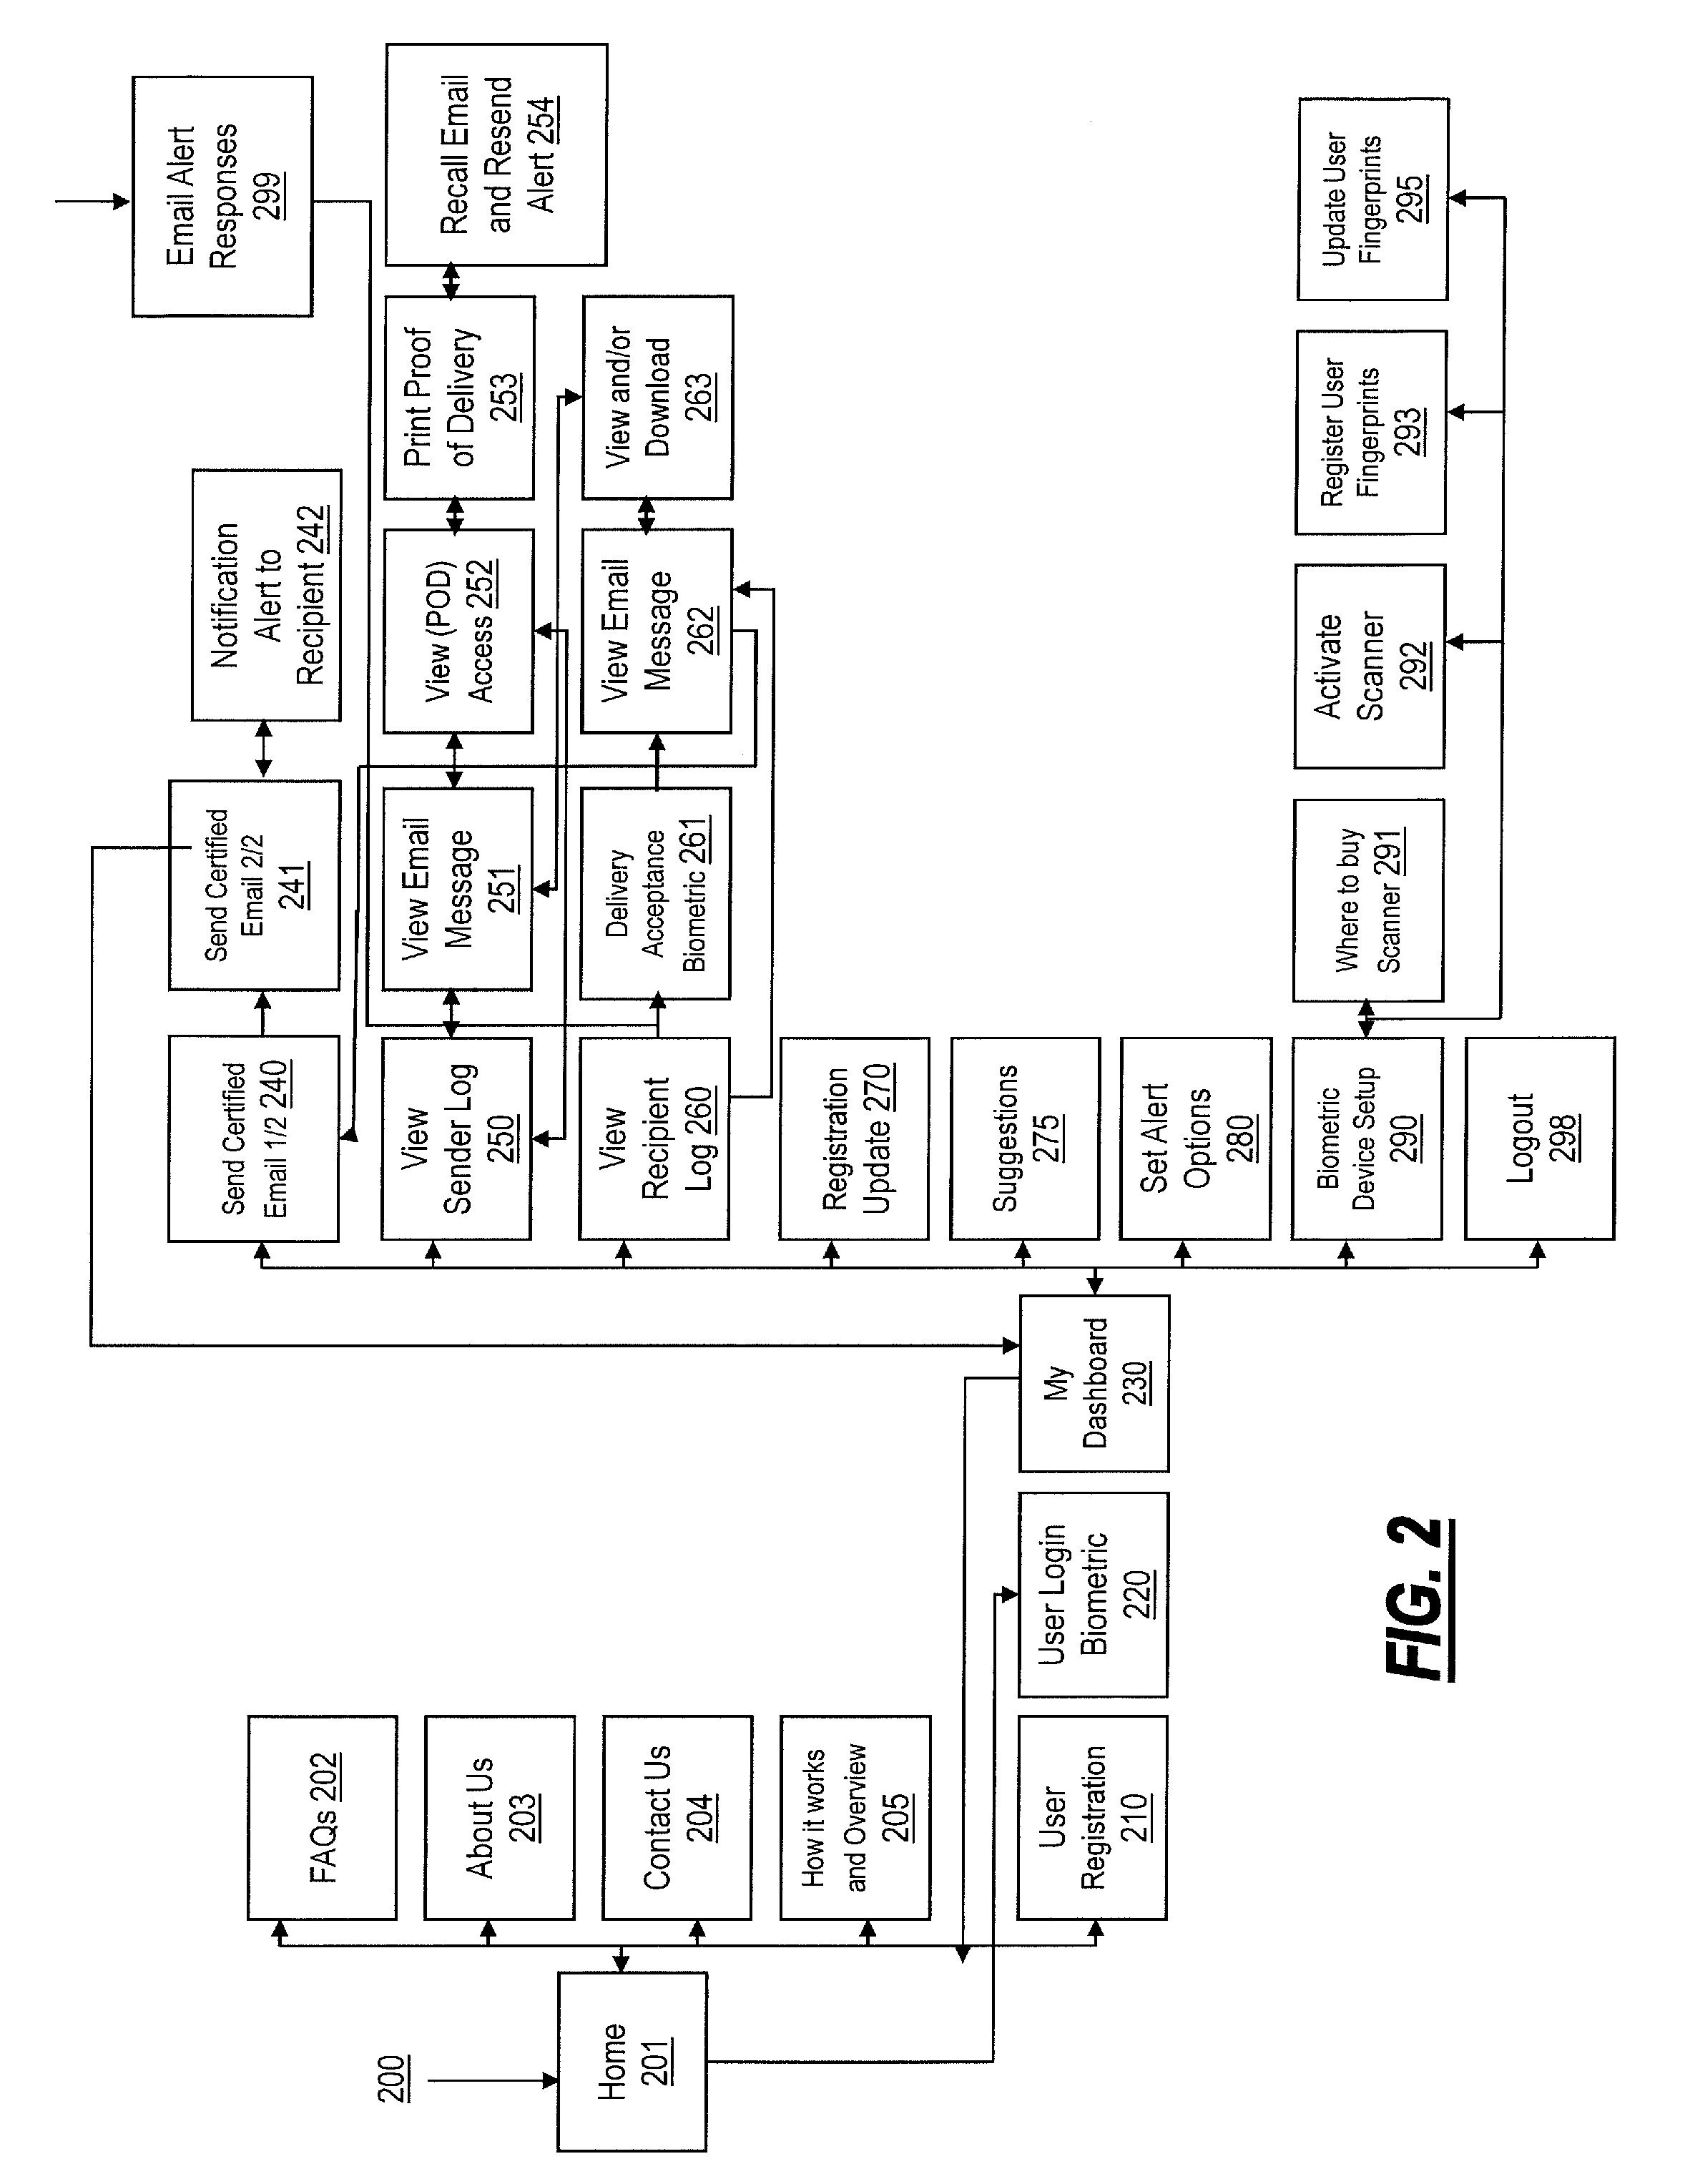 Systems and methods for secure and authentic electronic collaboration